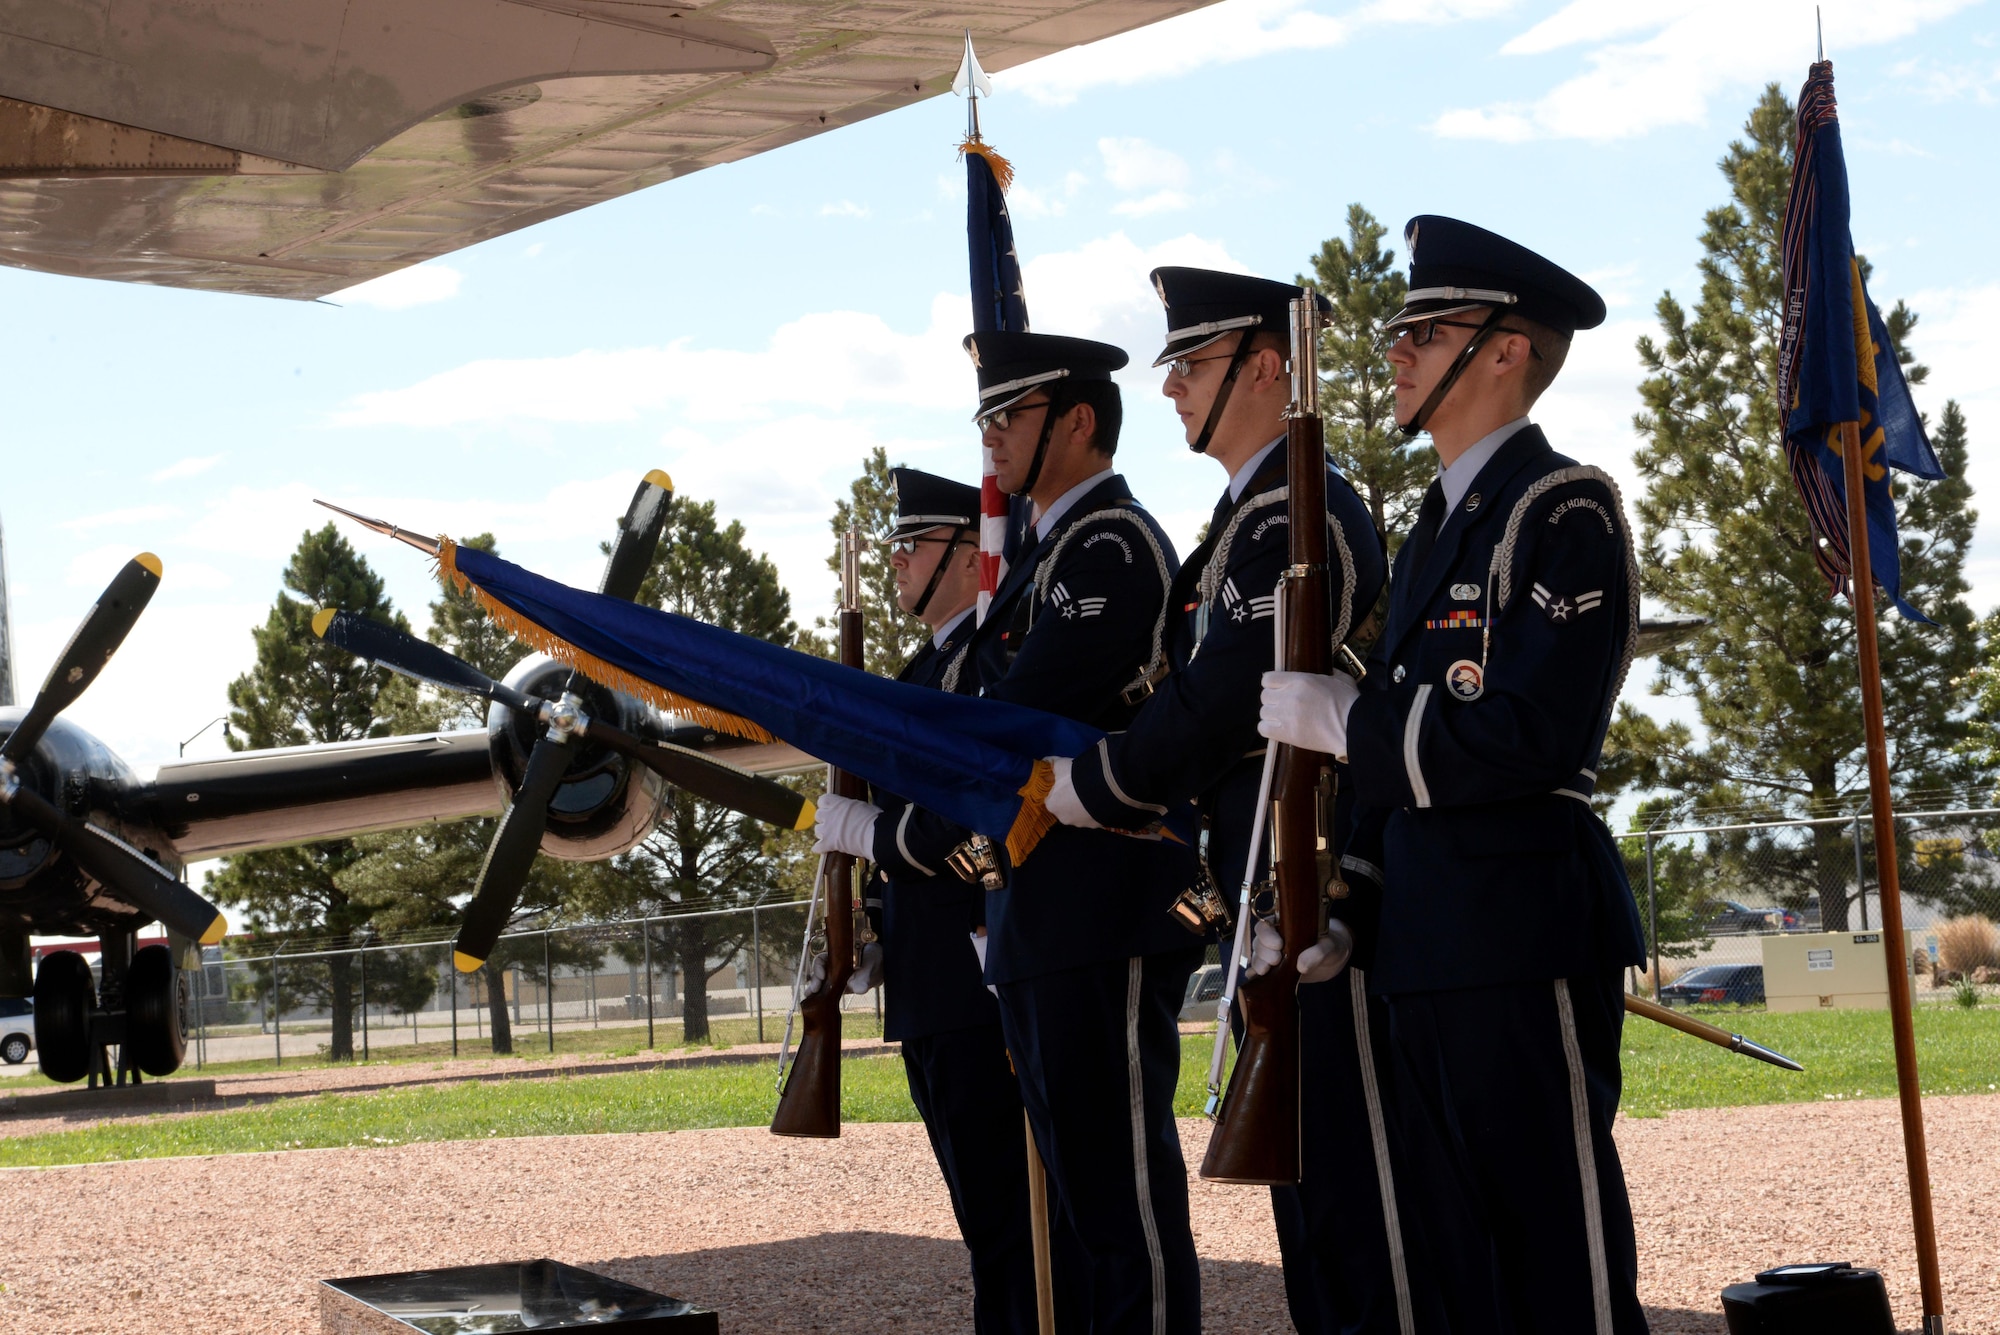 Honor Guard members from Ellsworth Air Force Base, S.D., present the colors during a memorial dedication and anniversary event at the South Dakota Air and Space Museum, Box Elder, S.D., June 24, 2017. The mission of the Ellsworth Honor Guard is to act as representatives for Airmen to both the American public and the world. (U.S. Air Force photo by Staff Sgt. Hailey Staker)